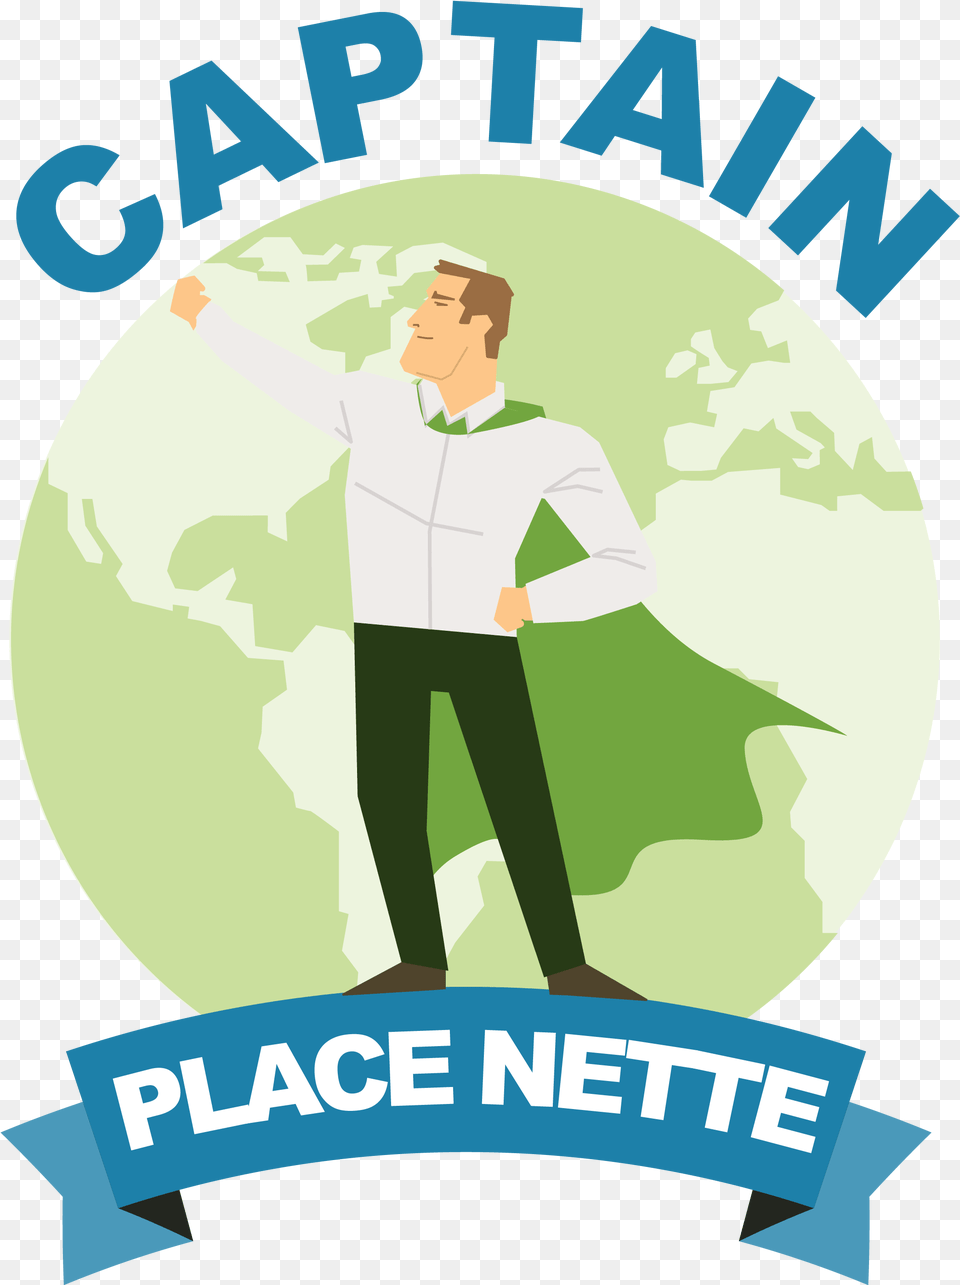 Captain Place Nette Decal, Adult, Poster, Person, Man Png